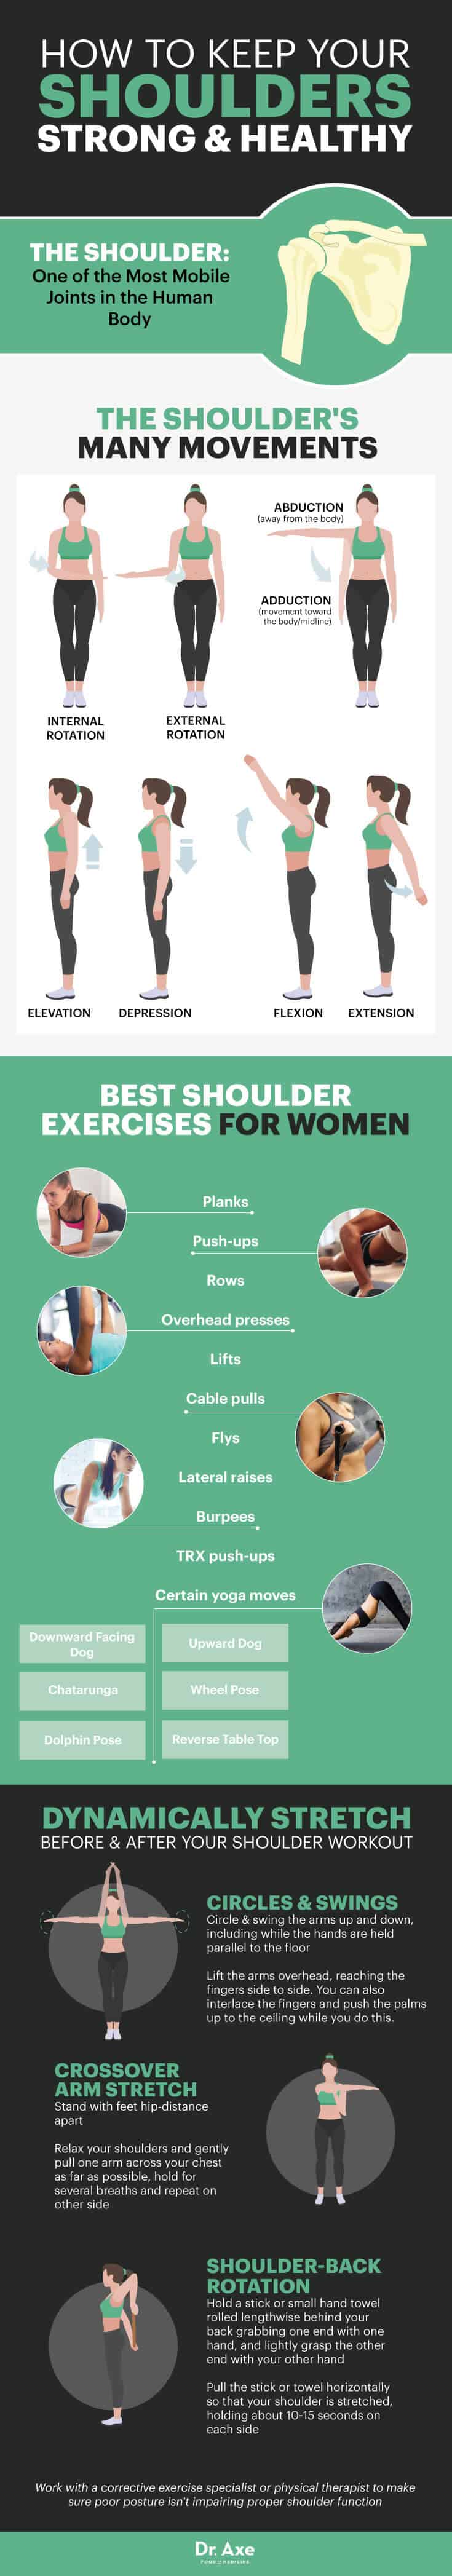 Shoulder workouts for women - Dr. Axe